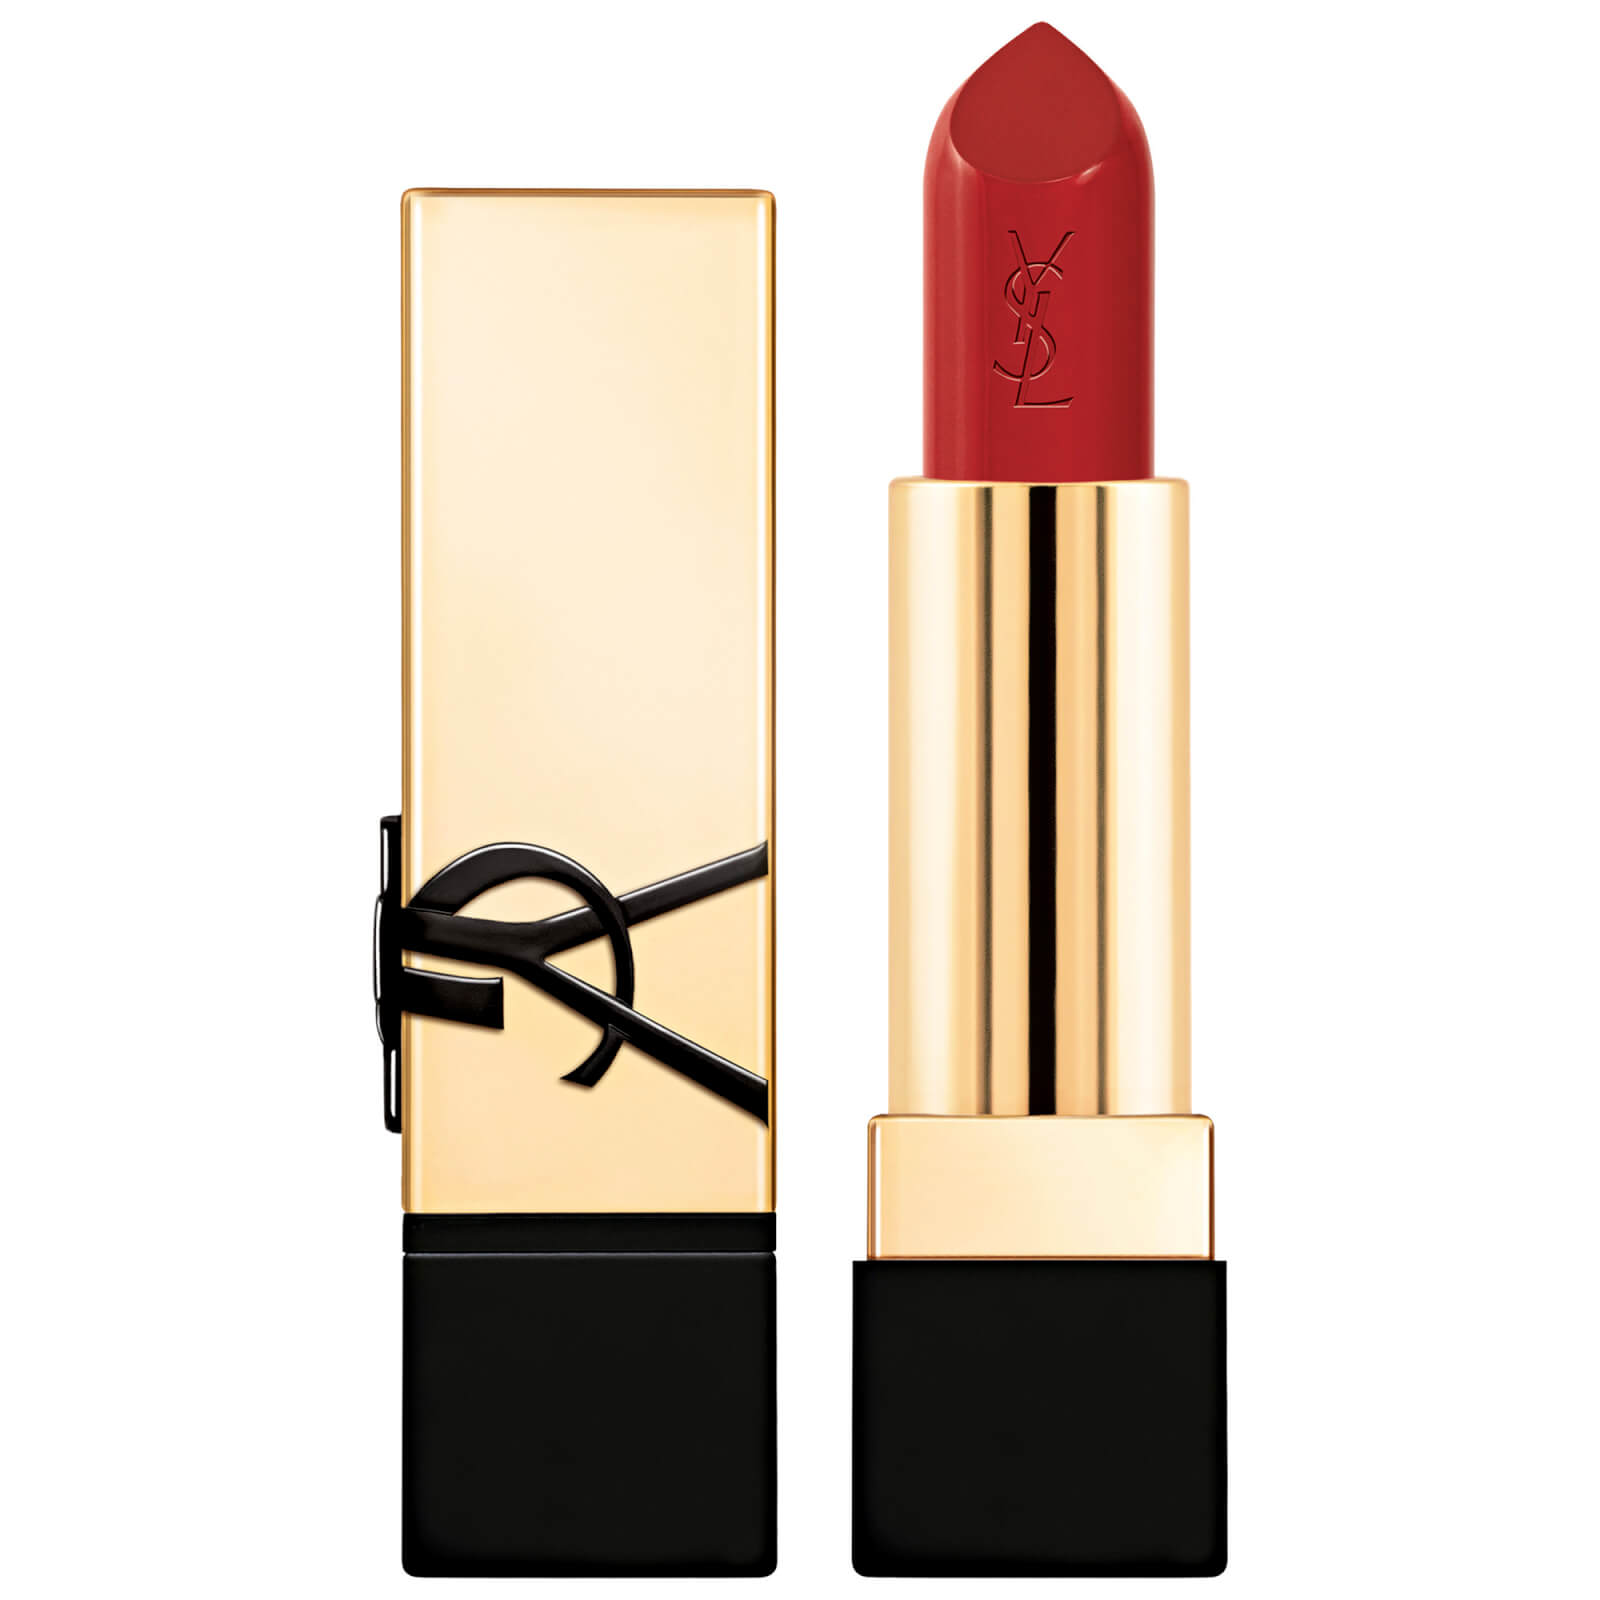 Ysl Yves Saint Laurent Rouge Pur Couture Renovation Lipstick 3g (various Shades) - R1971